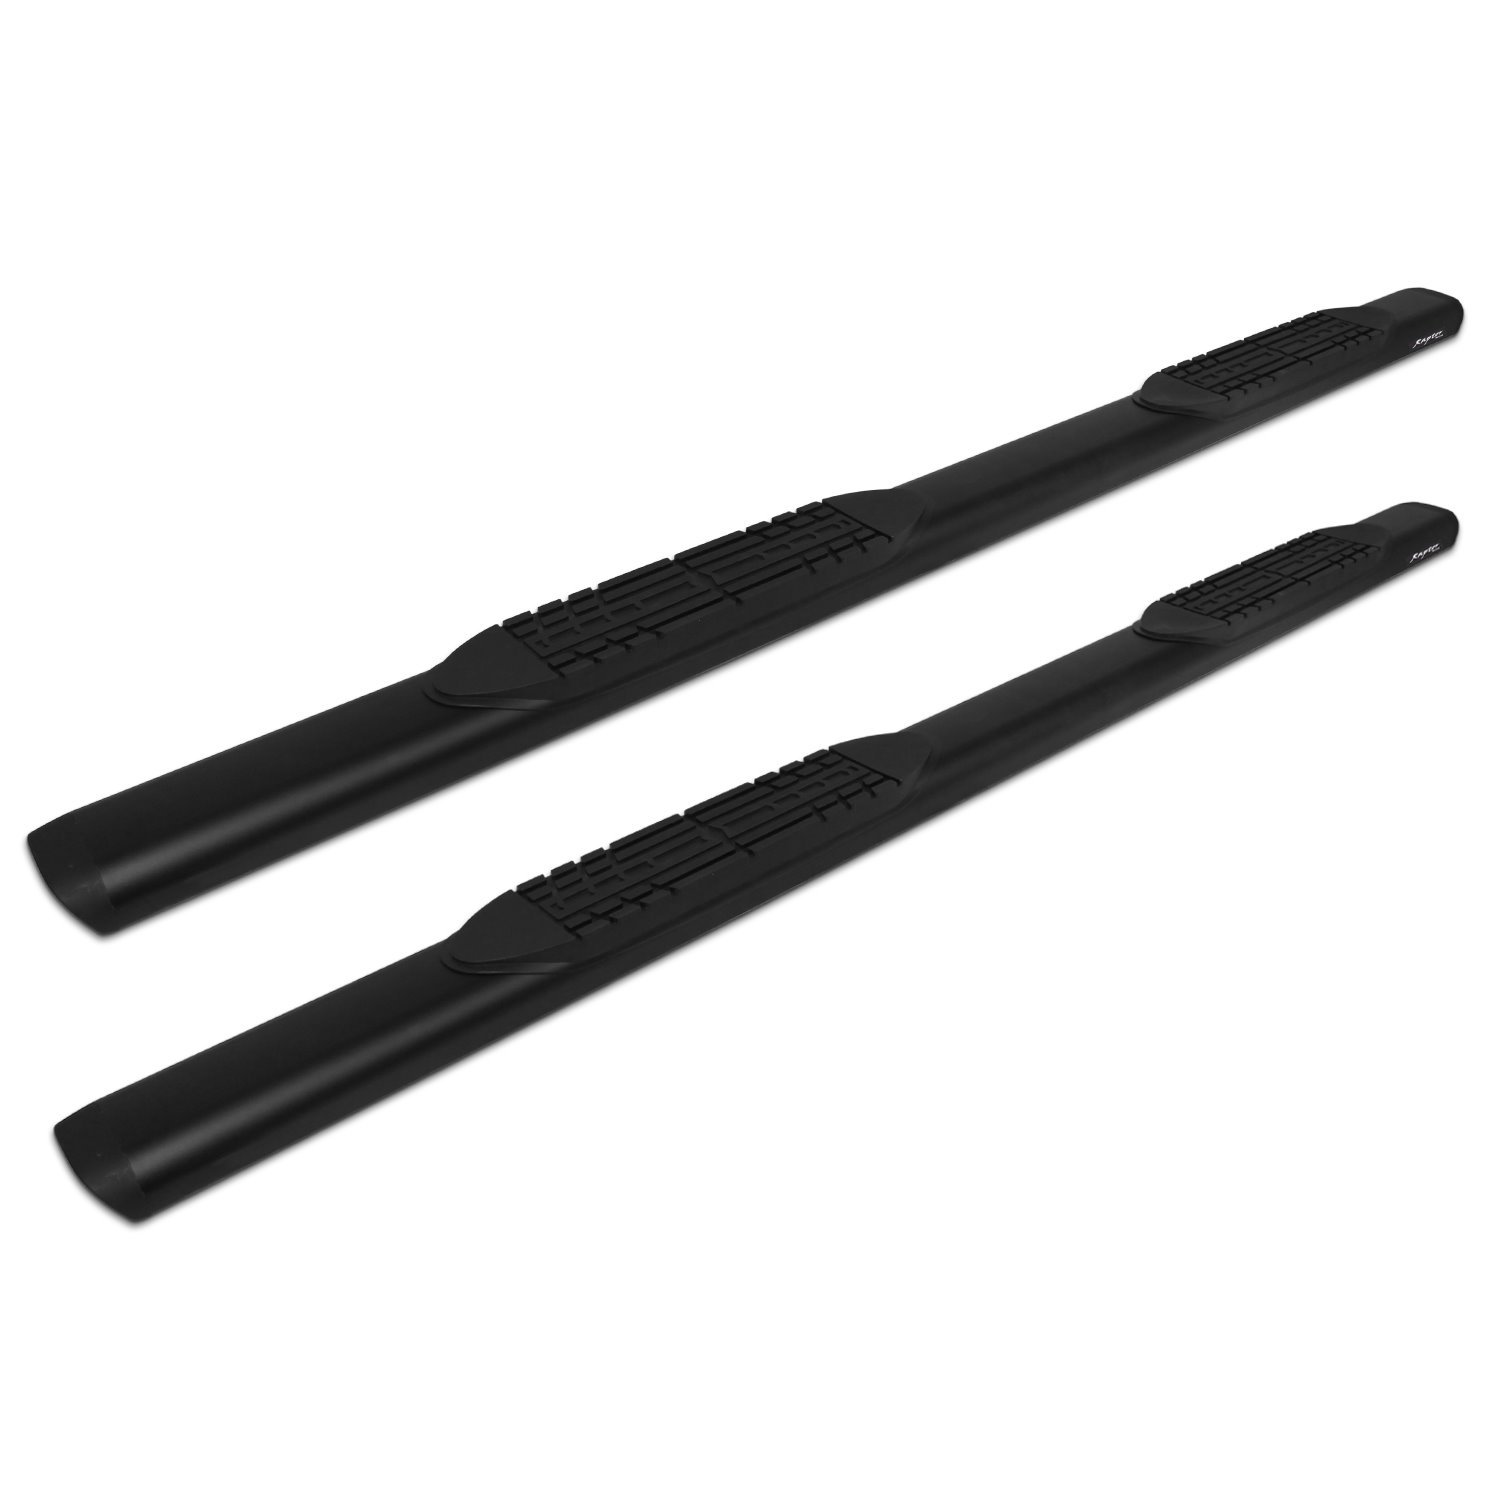 2003-0344BT 5 in Oval Style Slide Track Running Boards, Black Aluminum, 99-16 Ford F-250/F-350 Super Duty Crew Cab